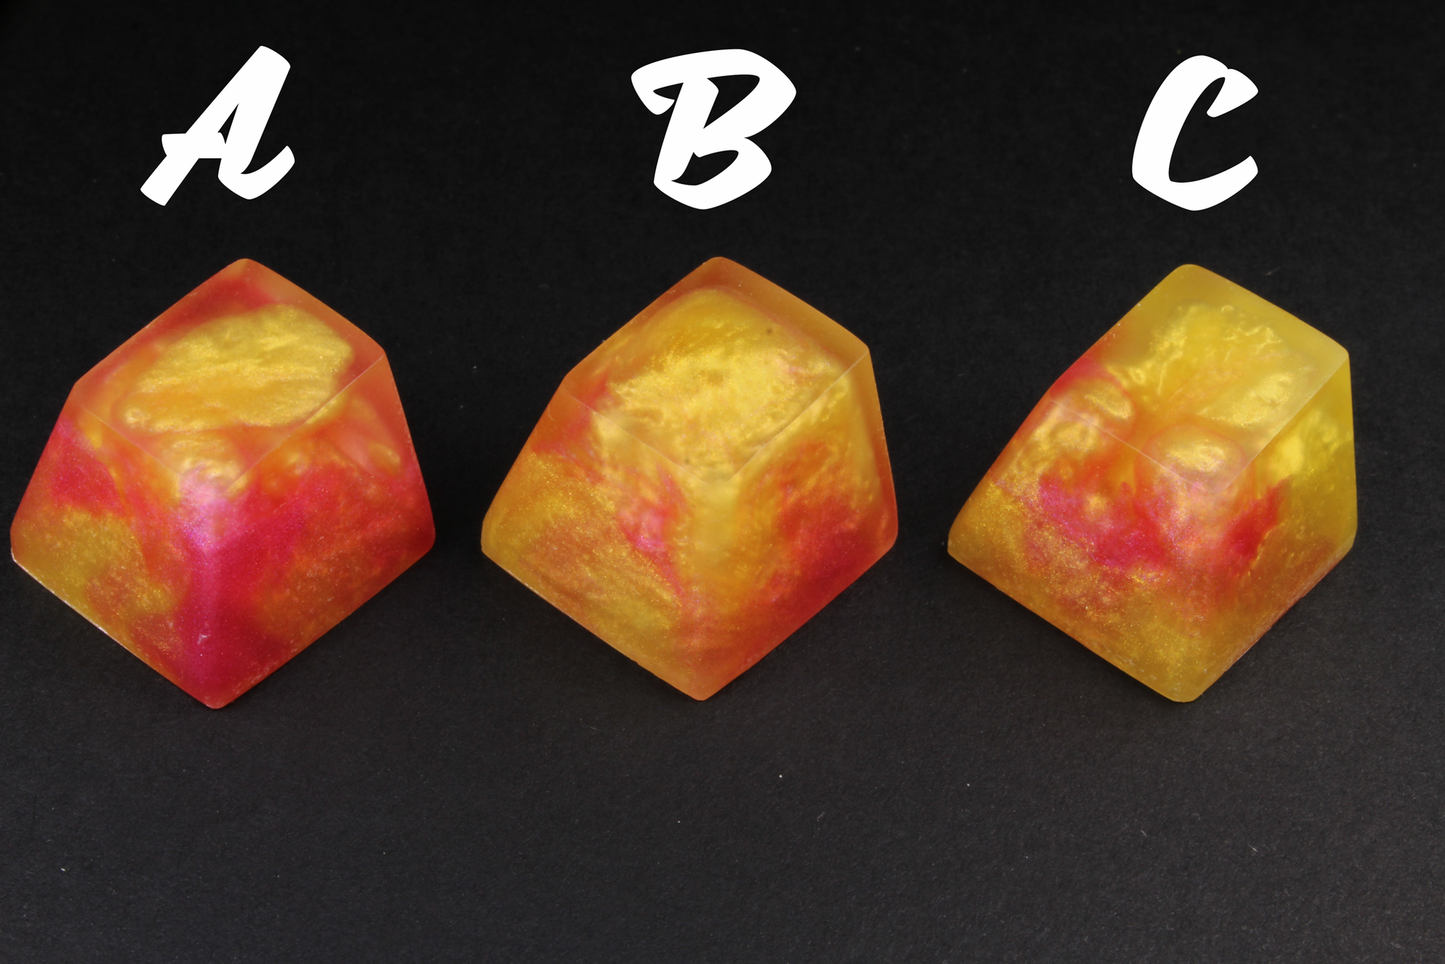 Chaos Caps 1.1 - Pink Dawn - PrimeCaps Keycap - Blank and Sculpted Artisan Keycaps for cherry MX mechanical keyboards 